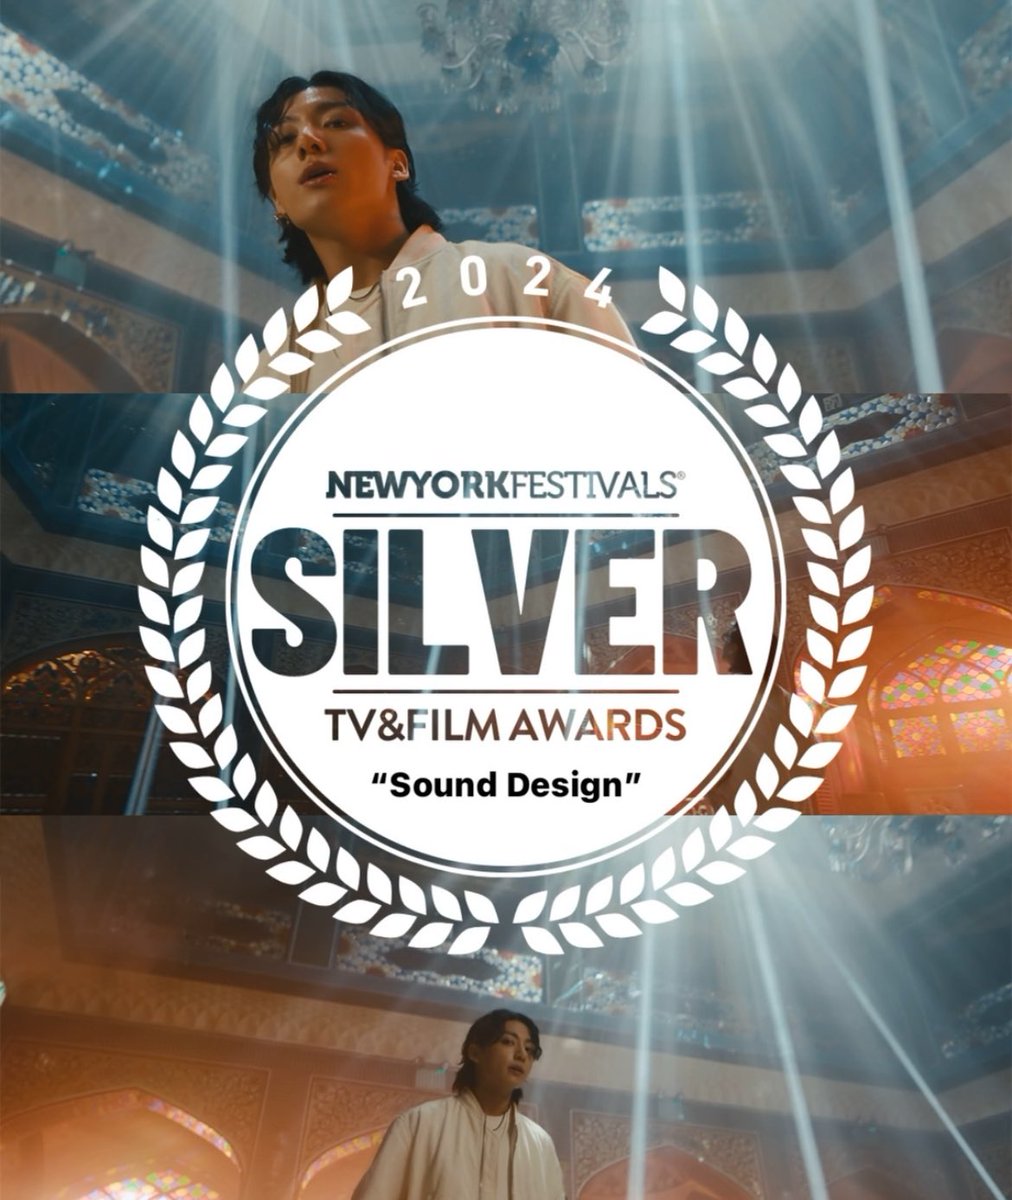 [INFO] Jungkook's 'Dreamers' has won the following at the New York Festivals TV & Film Awards 2024:

🏆SILVER award for Cinematography
🏆SILVER award for Sound Design
🏆BRONZE award for Camerawork
🏆FINALIST Certificate for Direction
🏆FINALIST Certificate for Streaming